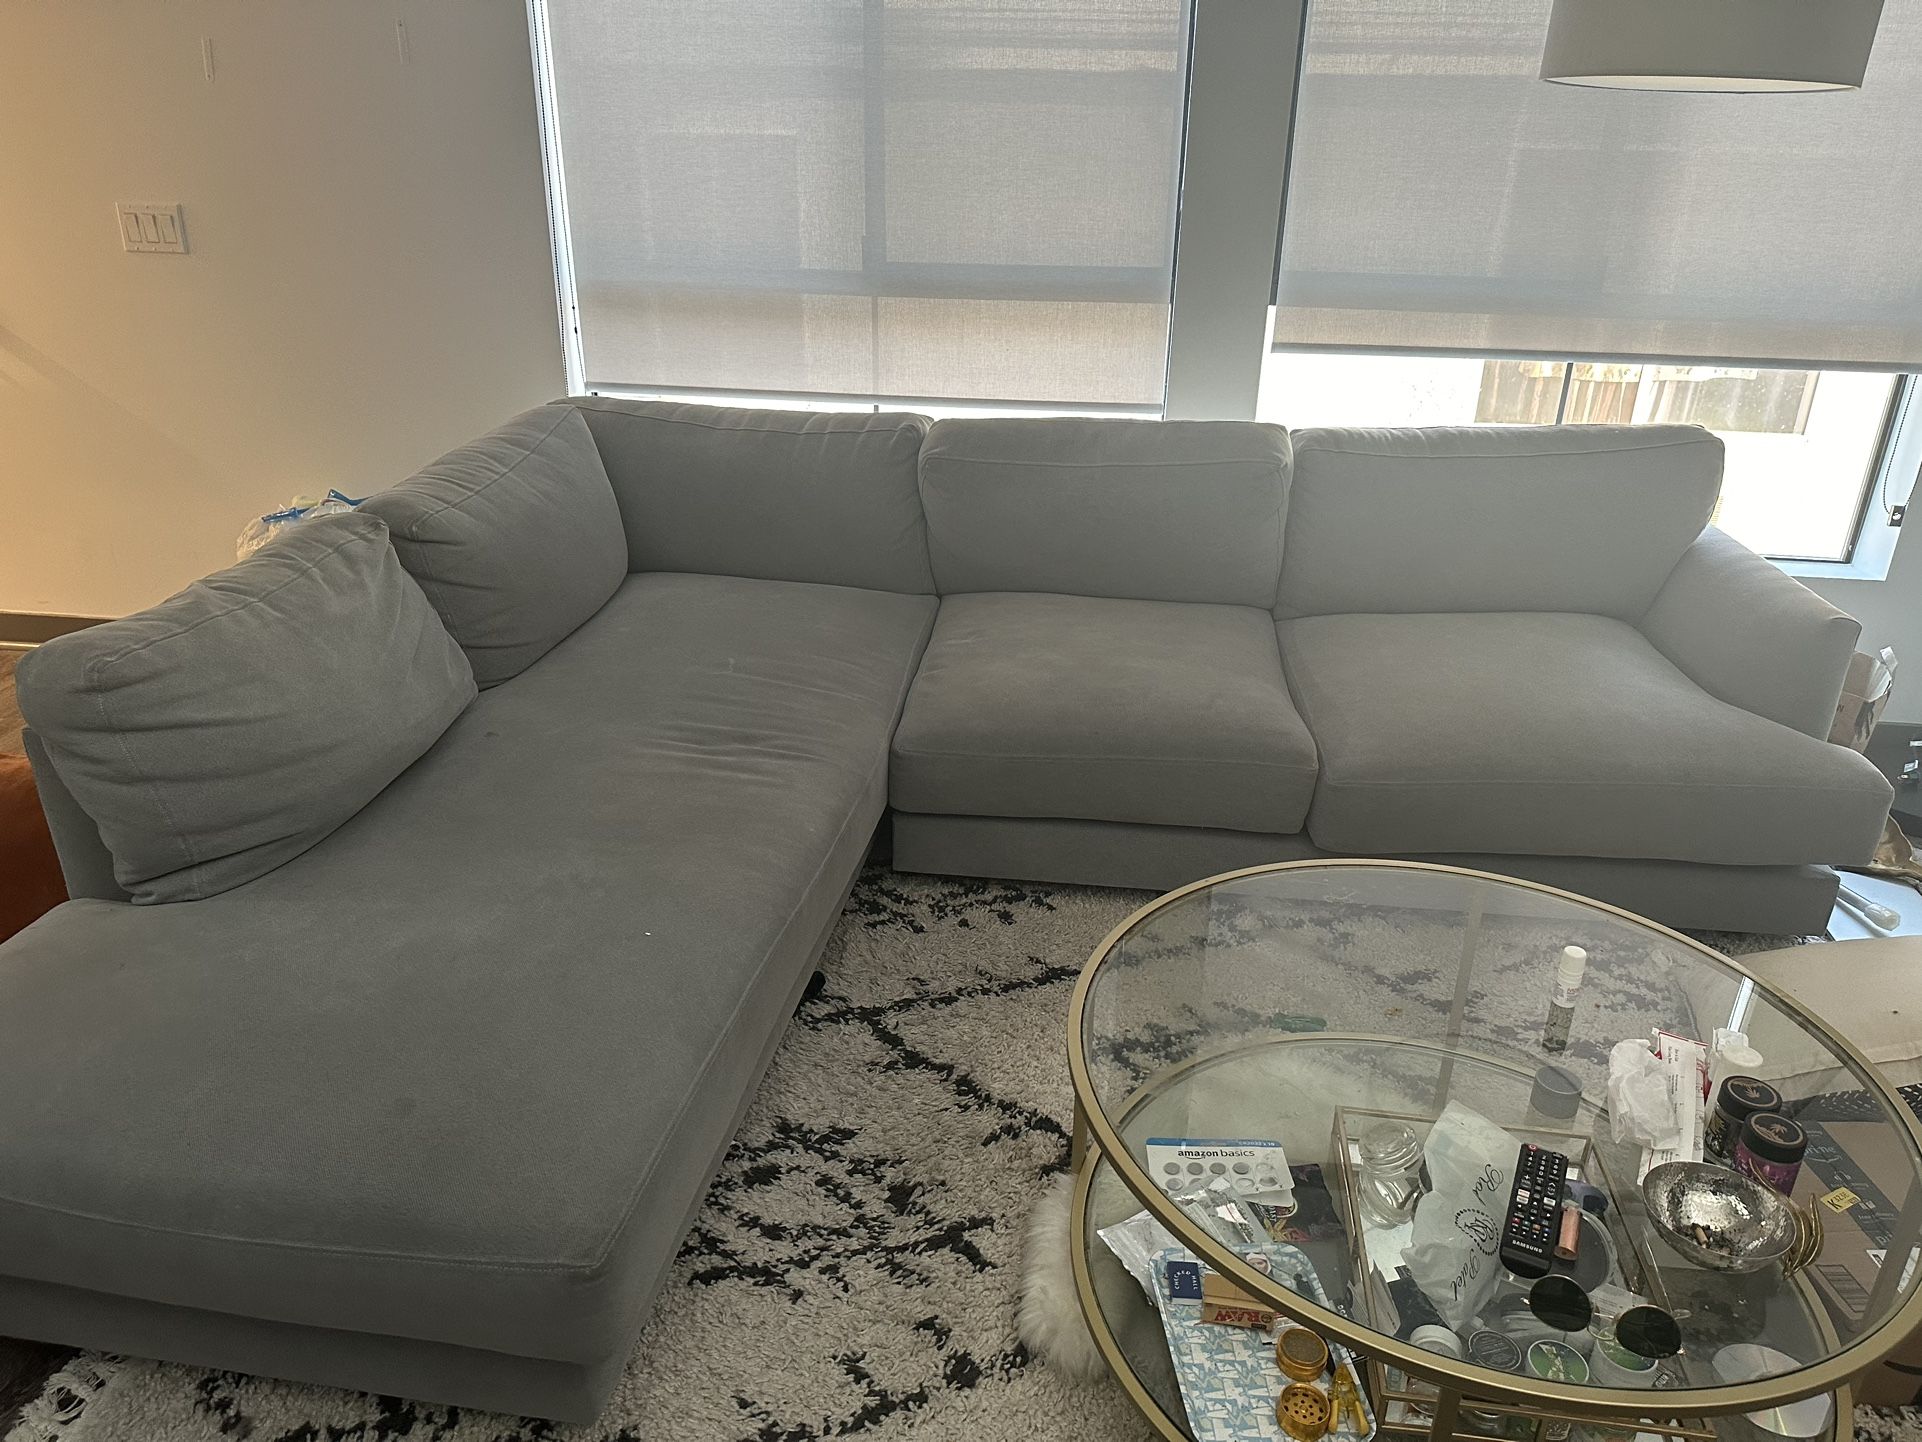 West Elm Haven Sectional